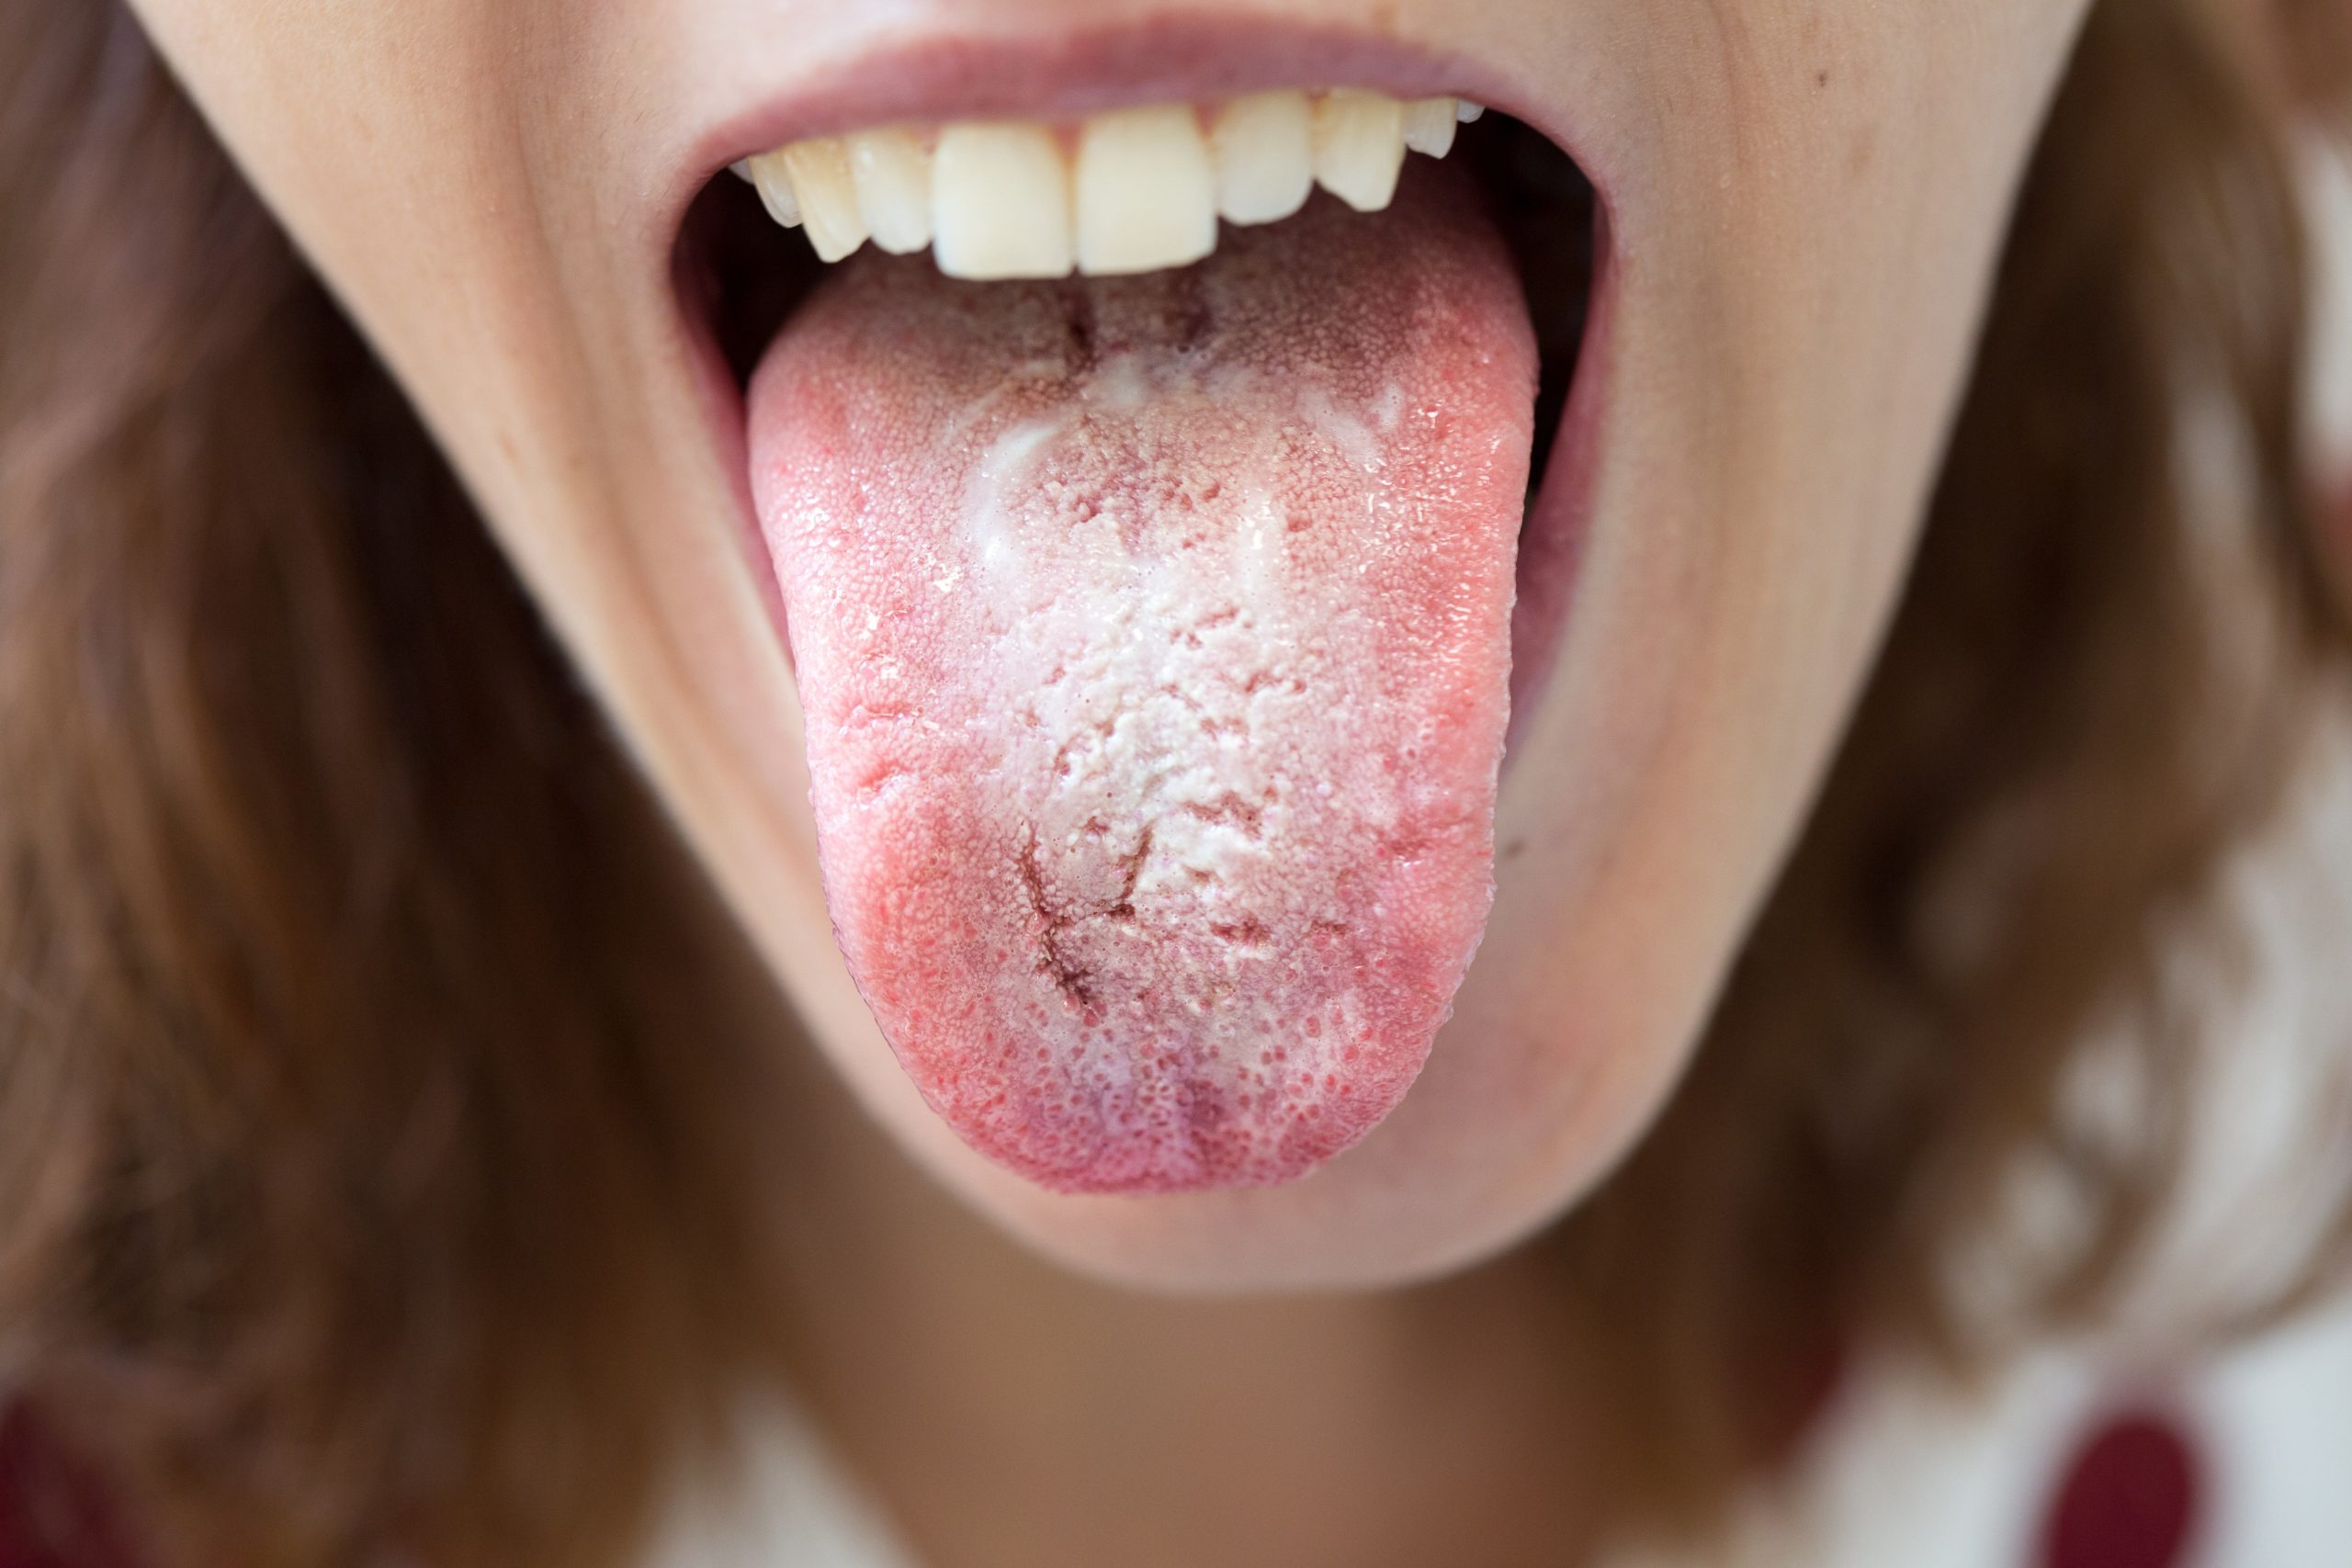 Oral candidiasis: causes, types and treatment - The Pharmaceutical Journal